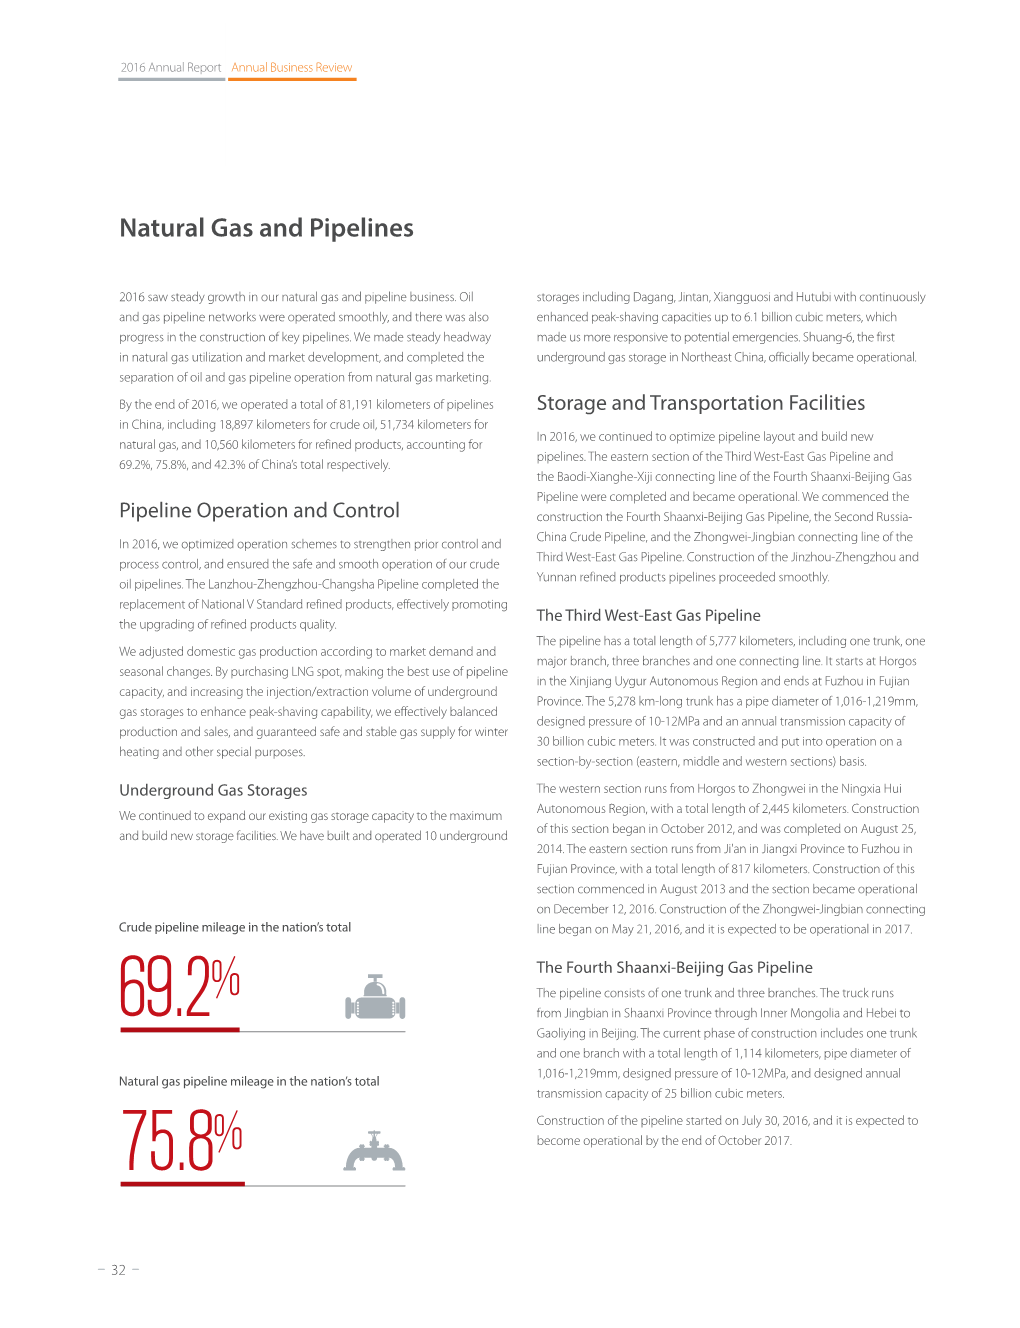 Natural Gas and Pipelines